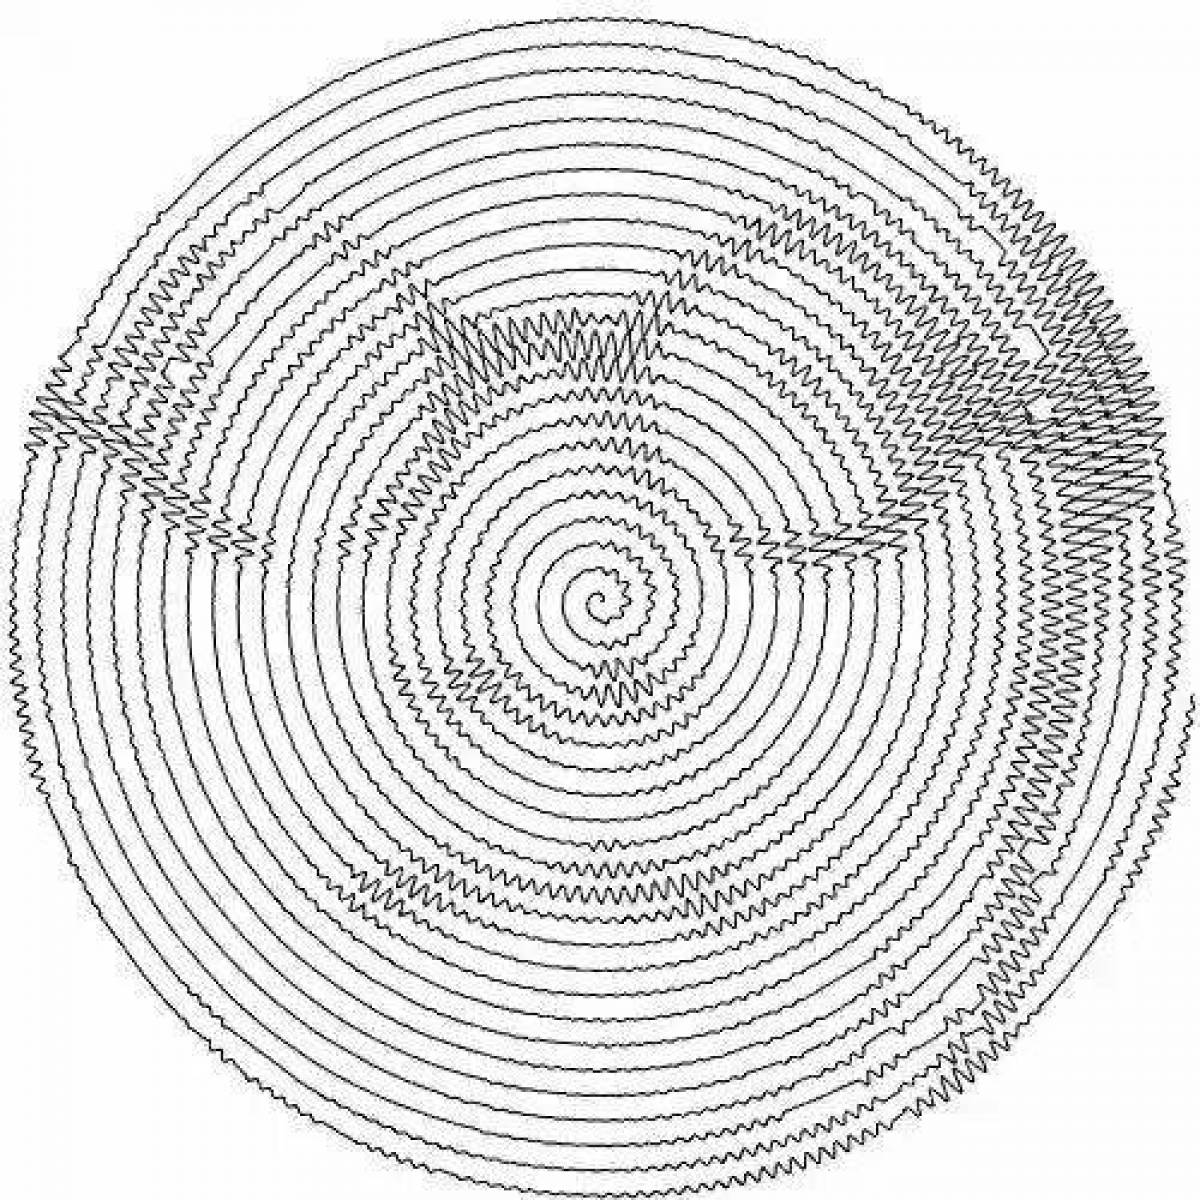 Fun round spiral coloring page